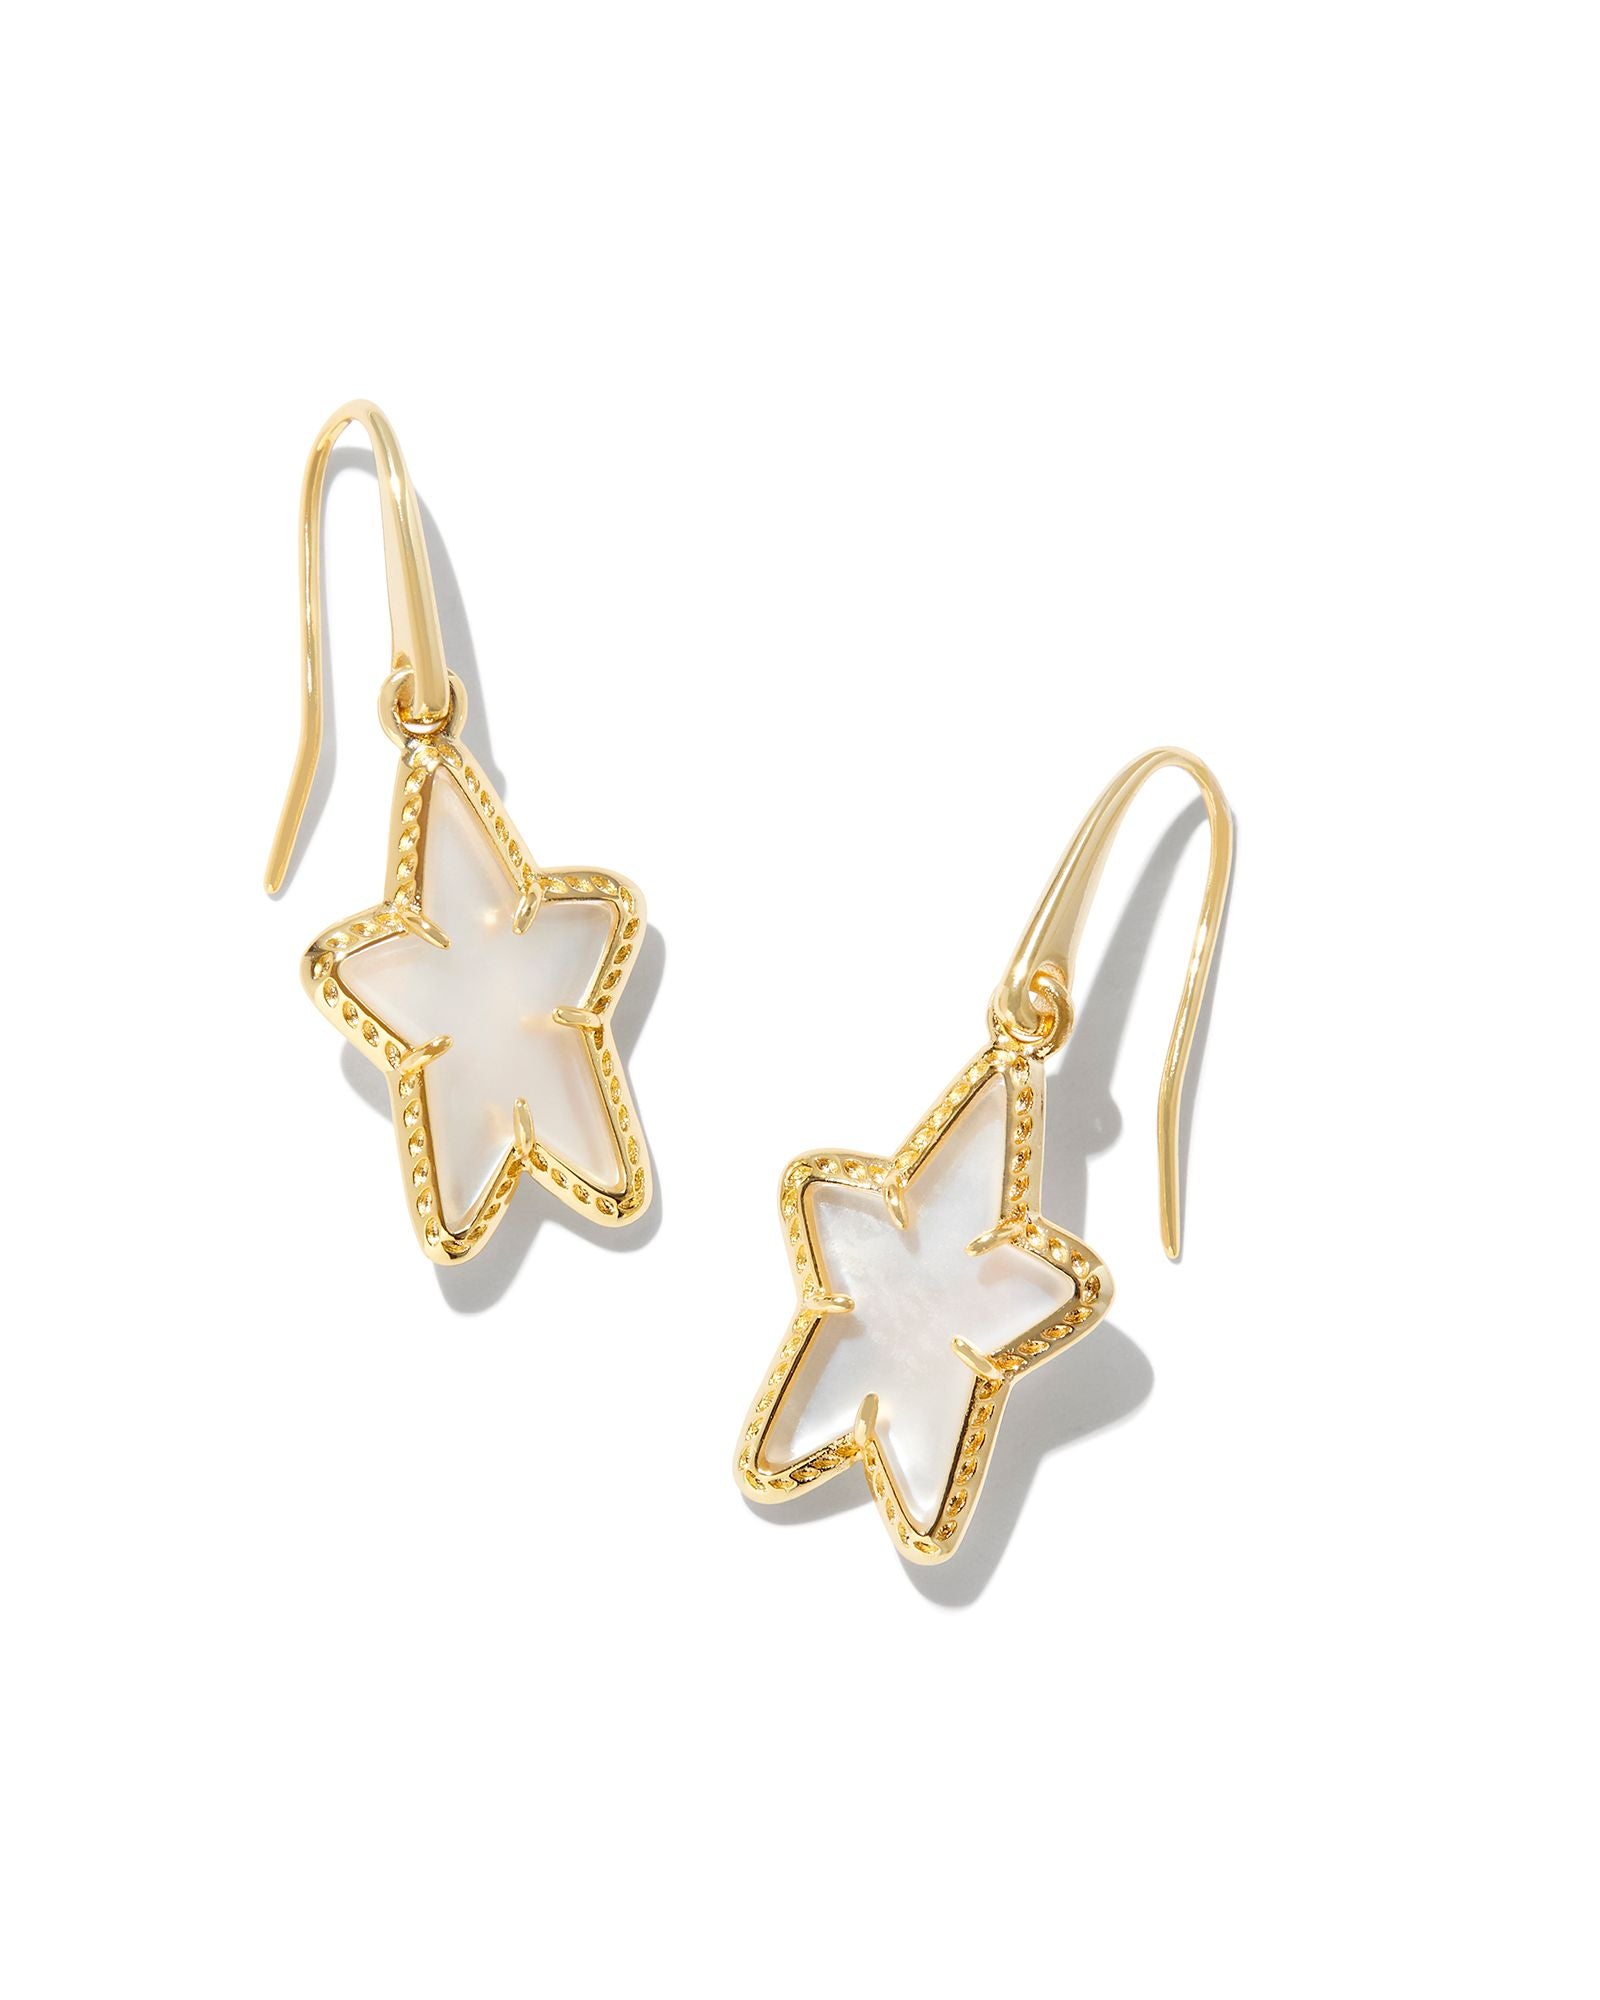 Ada Star Small Drop Earrings in Gold Mother of Pearl